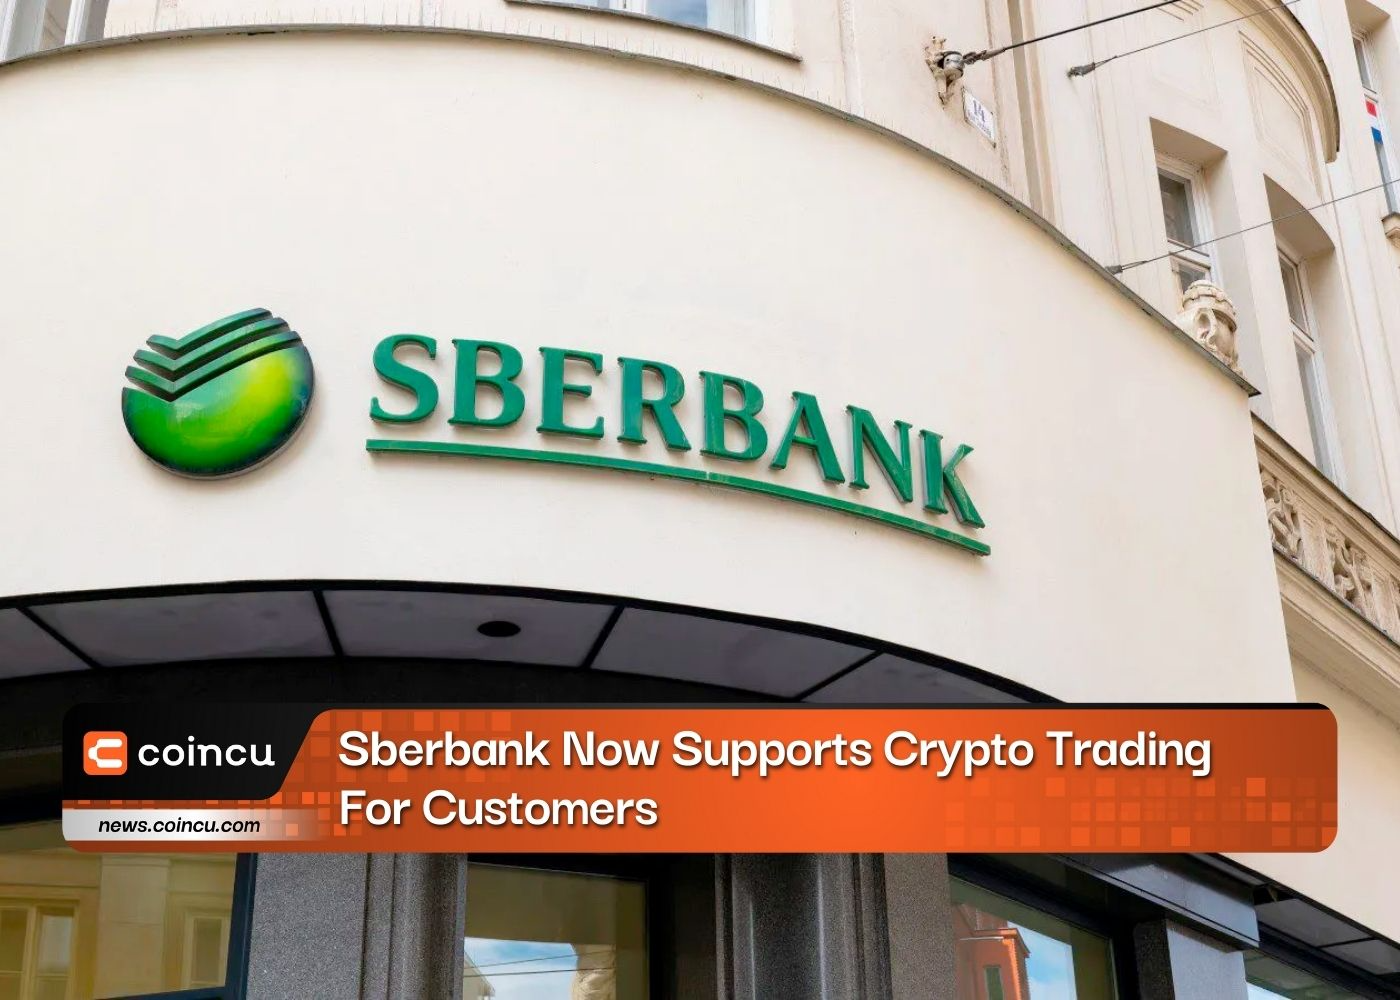 Sberbank Now Supports Crypto Trading For Customers